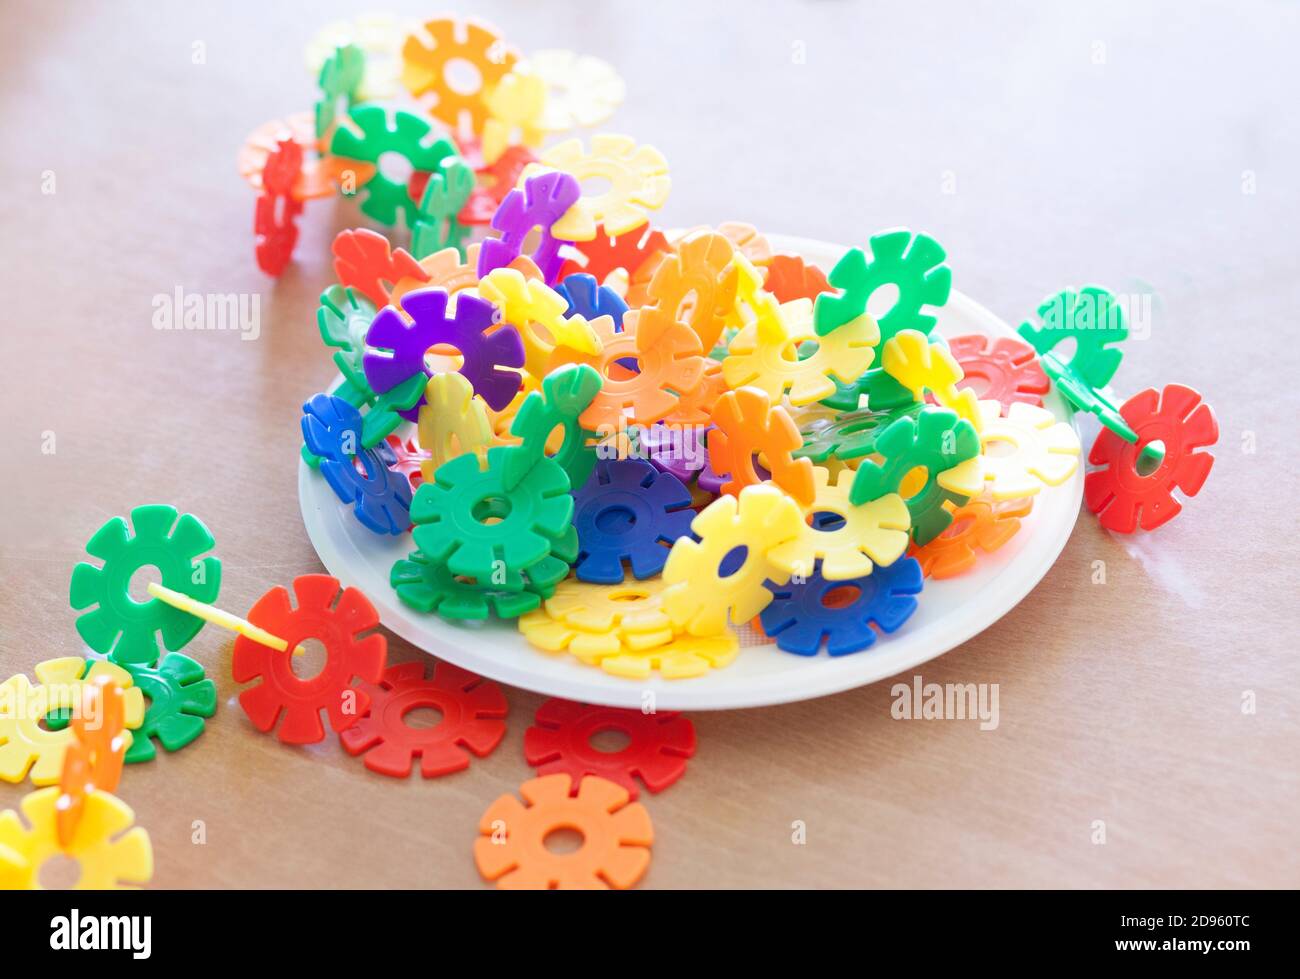 Plastic flakes blocks on plate. Instructive toy that promotes spatial hhinking and fine motor skills. Stock Photo